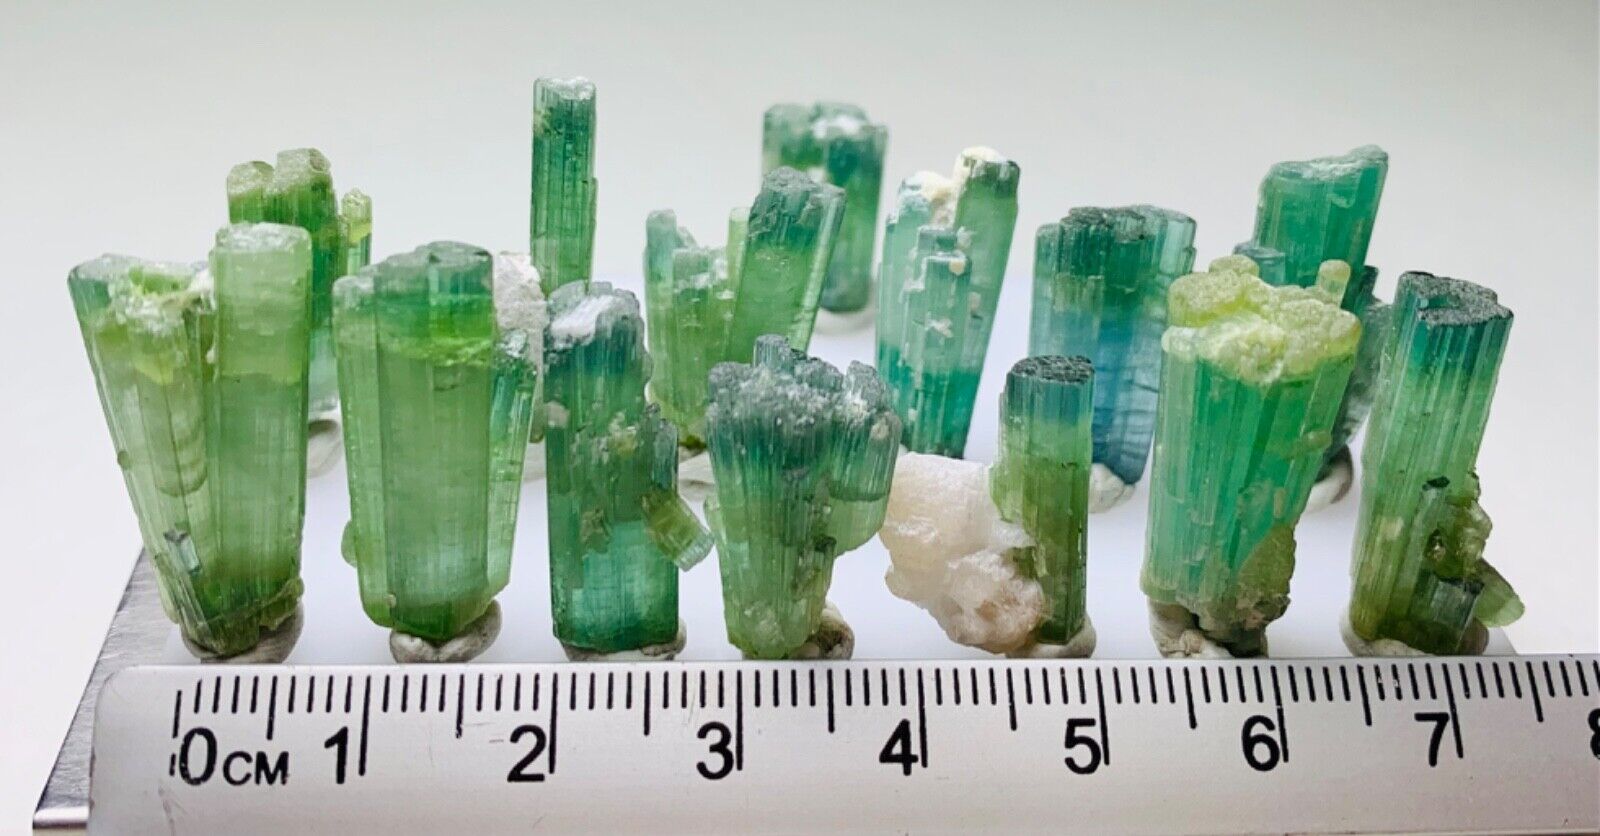 150.45 Ct Bi Colour Well Terminated Tourmaline Bunch Crystals From Afghanistan